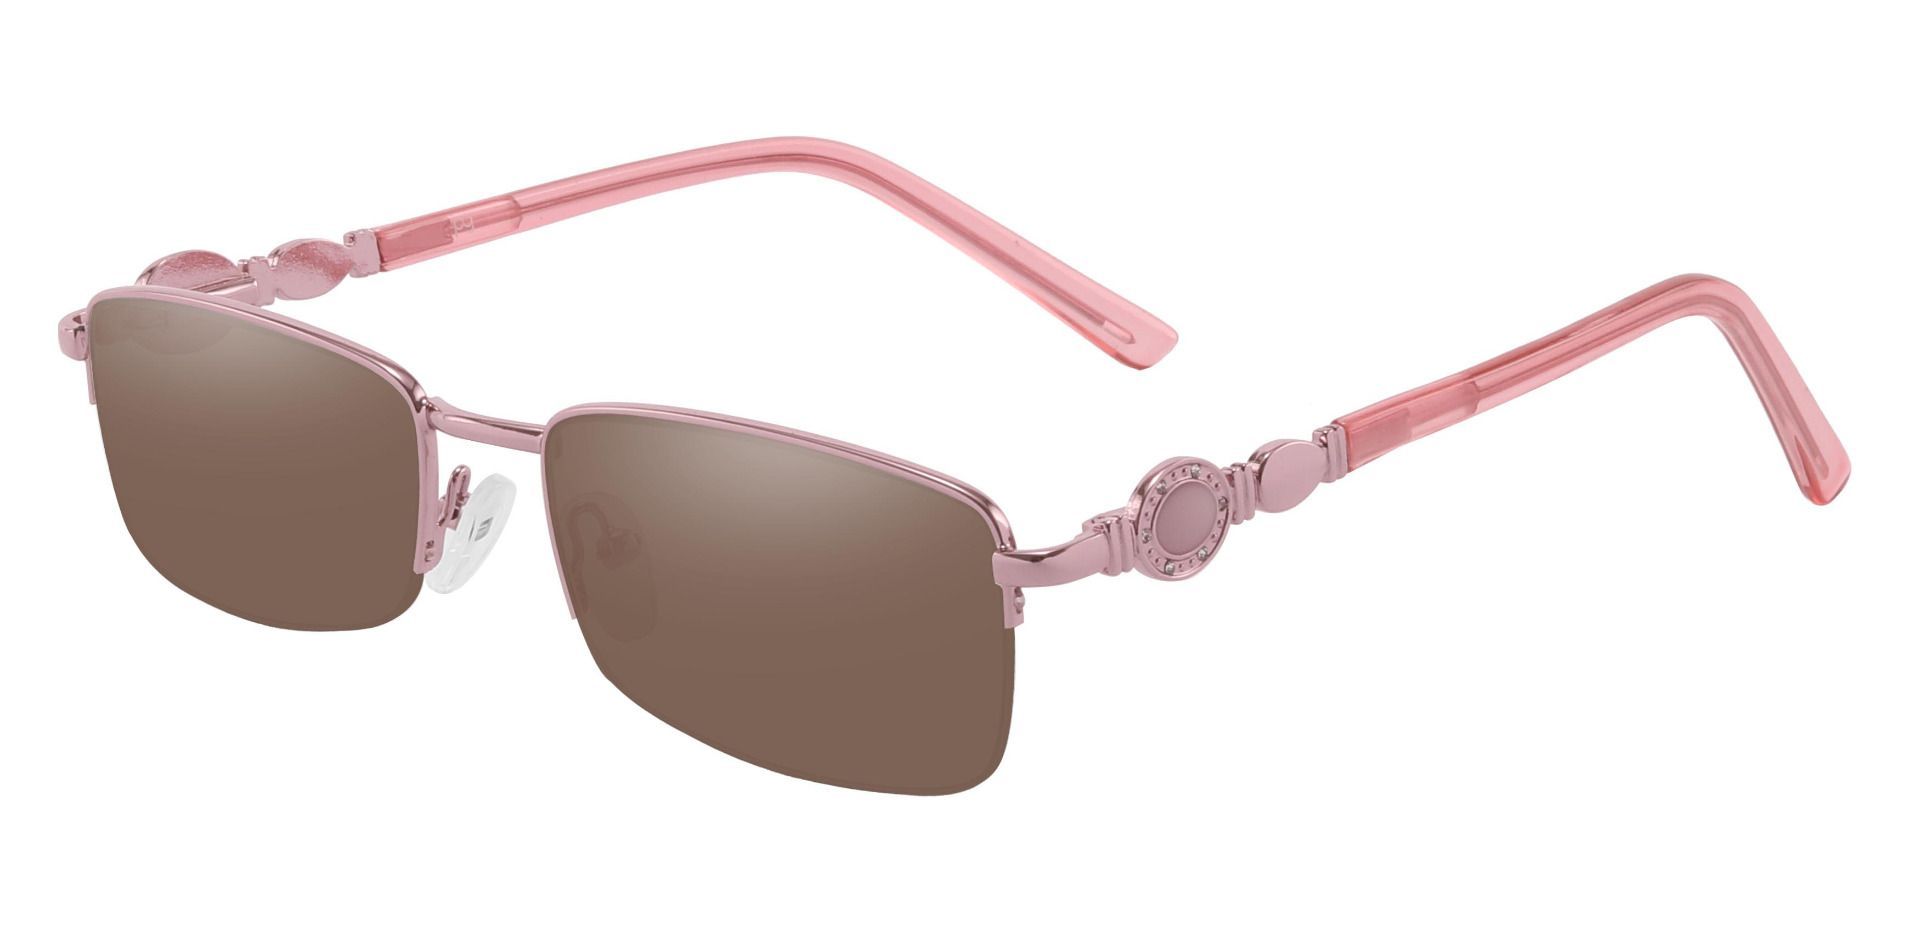 Crowley Rectangle Non-Rx Sunglasses - Pink Frame With Brown Lenses